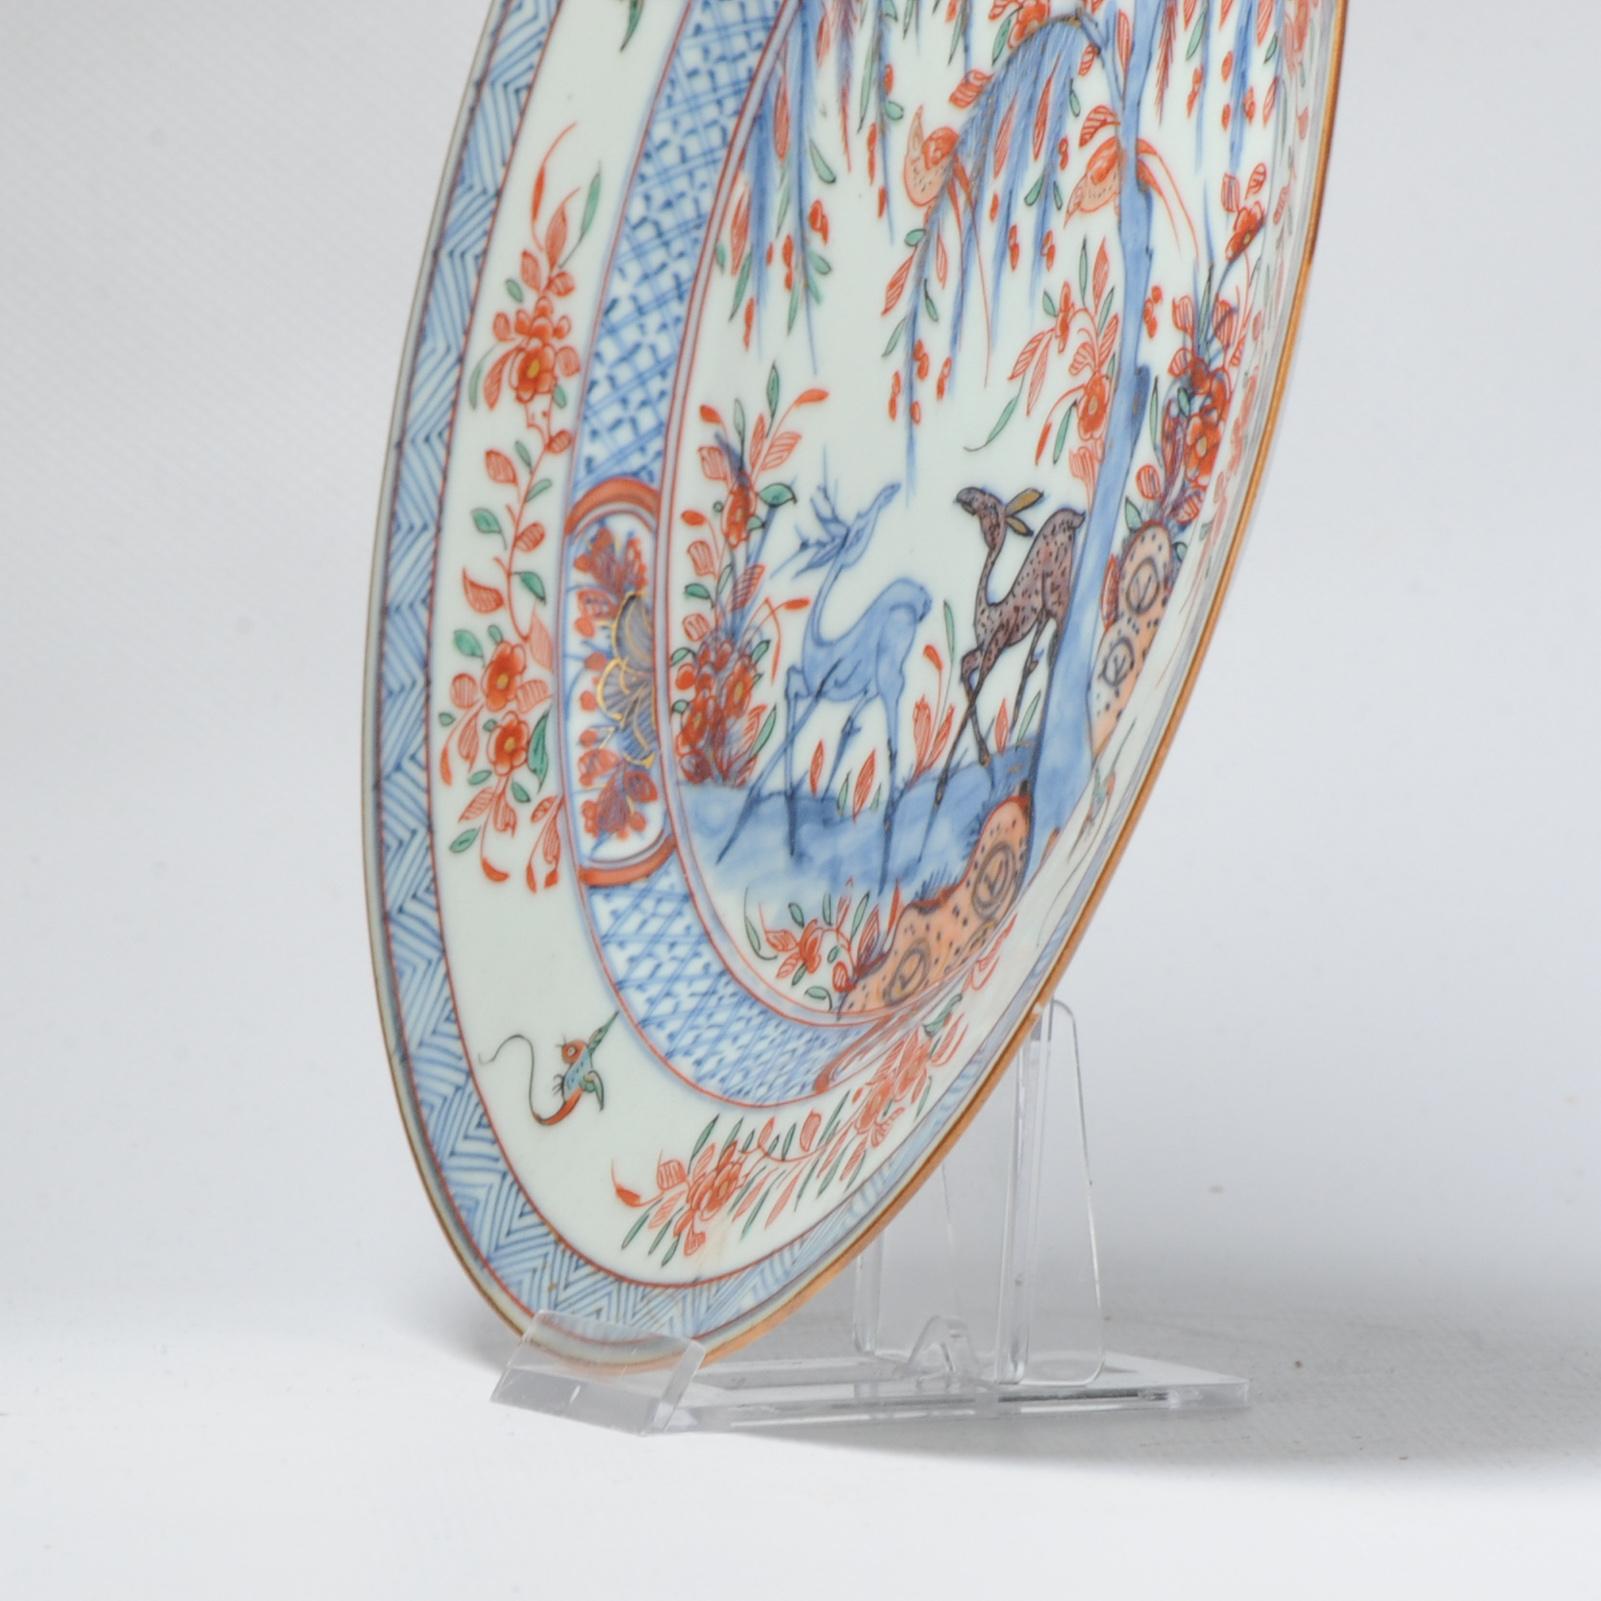 A very nicely made piece of 18th century Qianlong Amsterdam Bont porcelain decorated with deer, birds, flowers and trees. Underglaze blue and overglaze other enamels. The small birds in the border are in Kakiemon design.

Additional